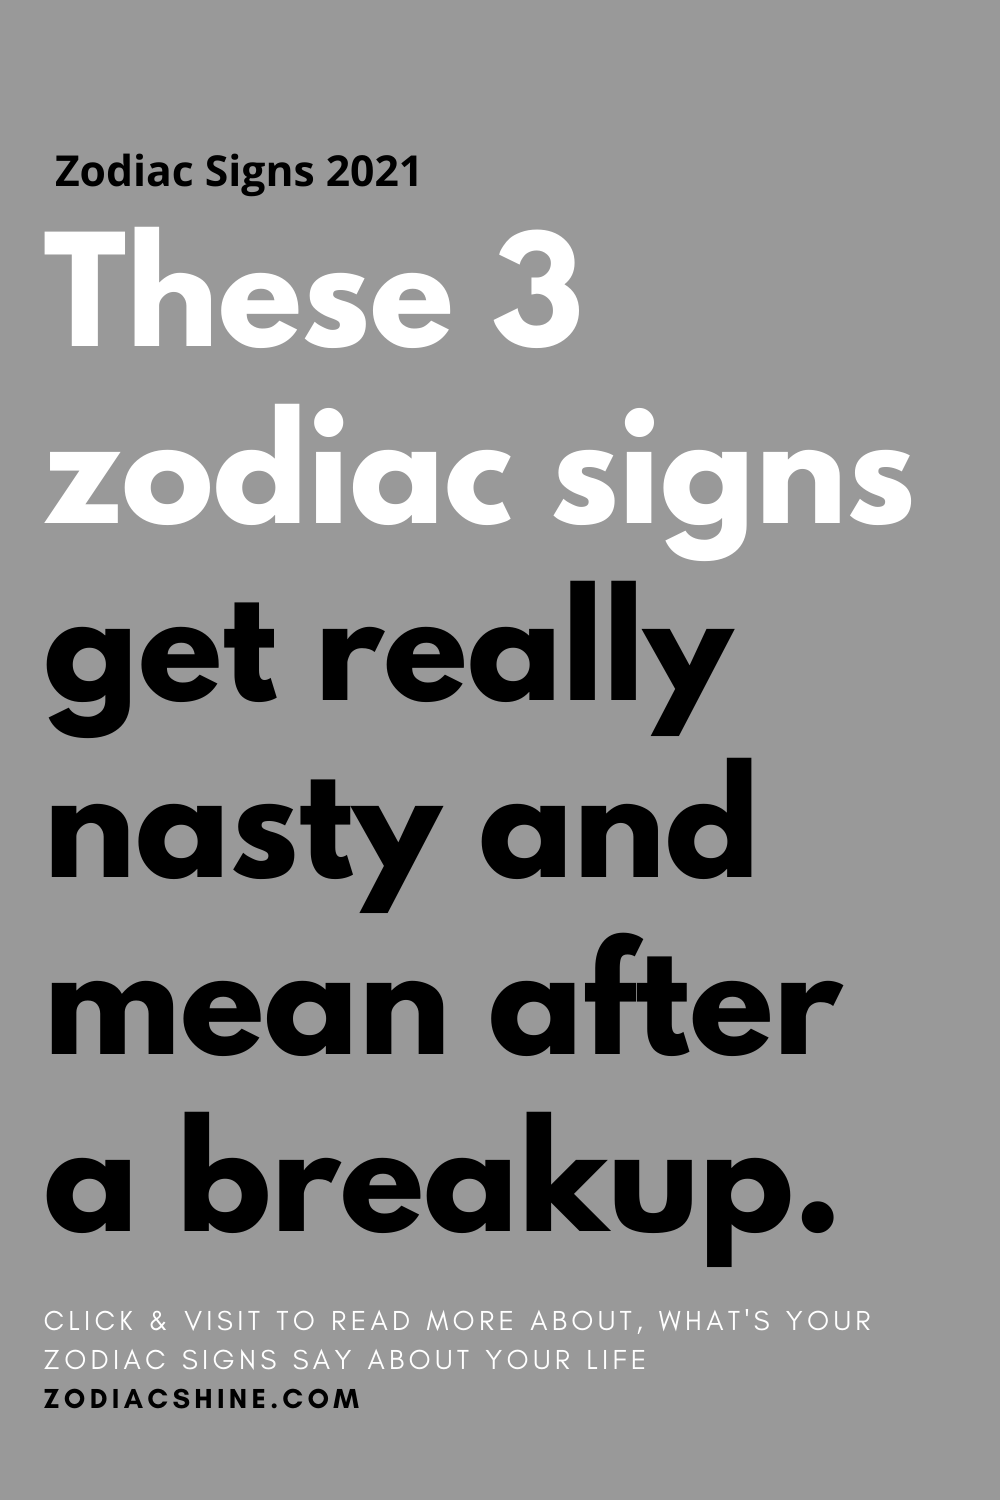 These 3 zodiac signs get really nasty and mean after a breakup ...